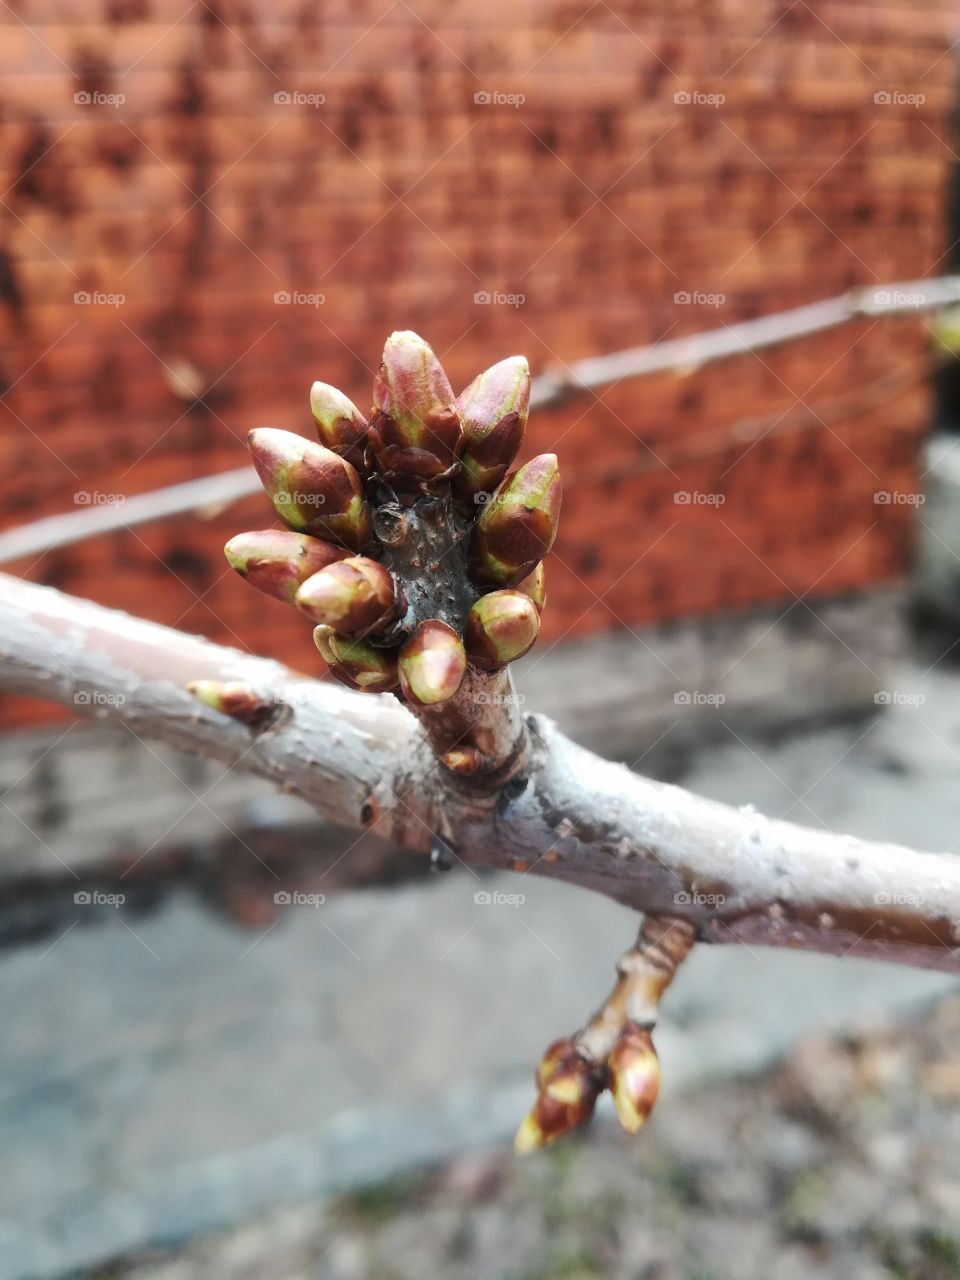 First signs of spring